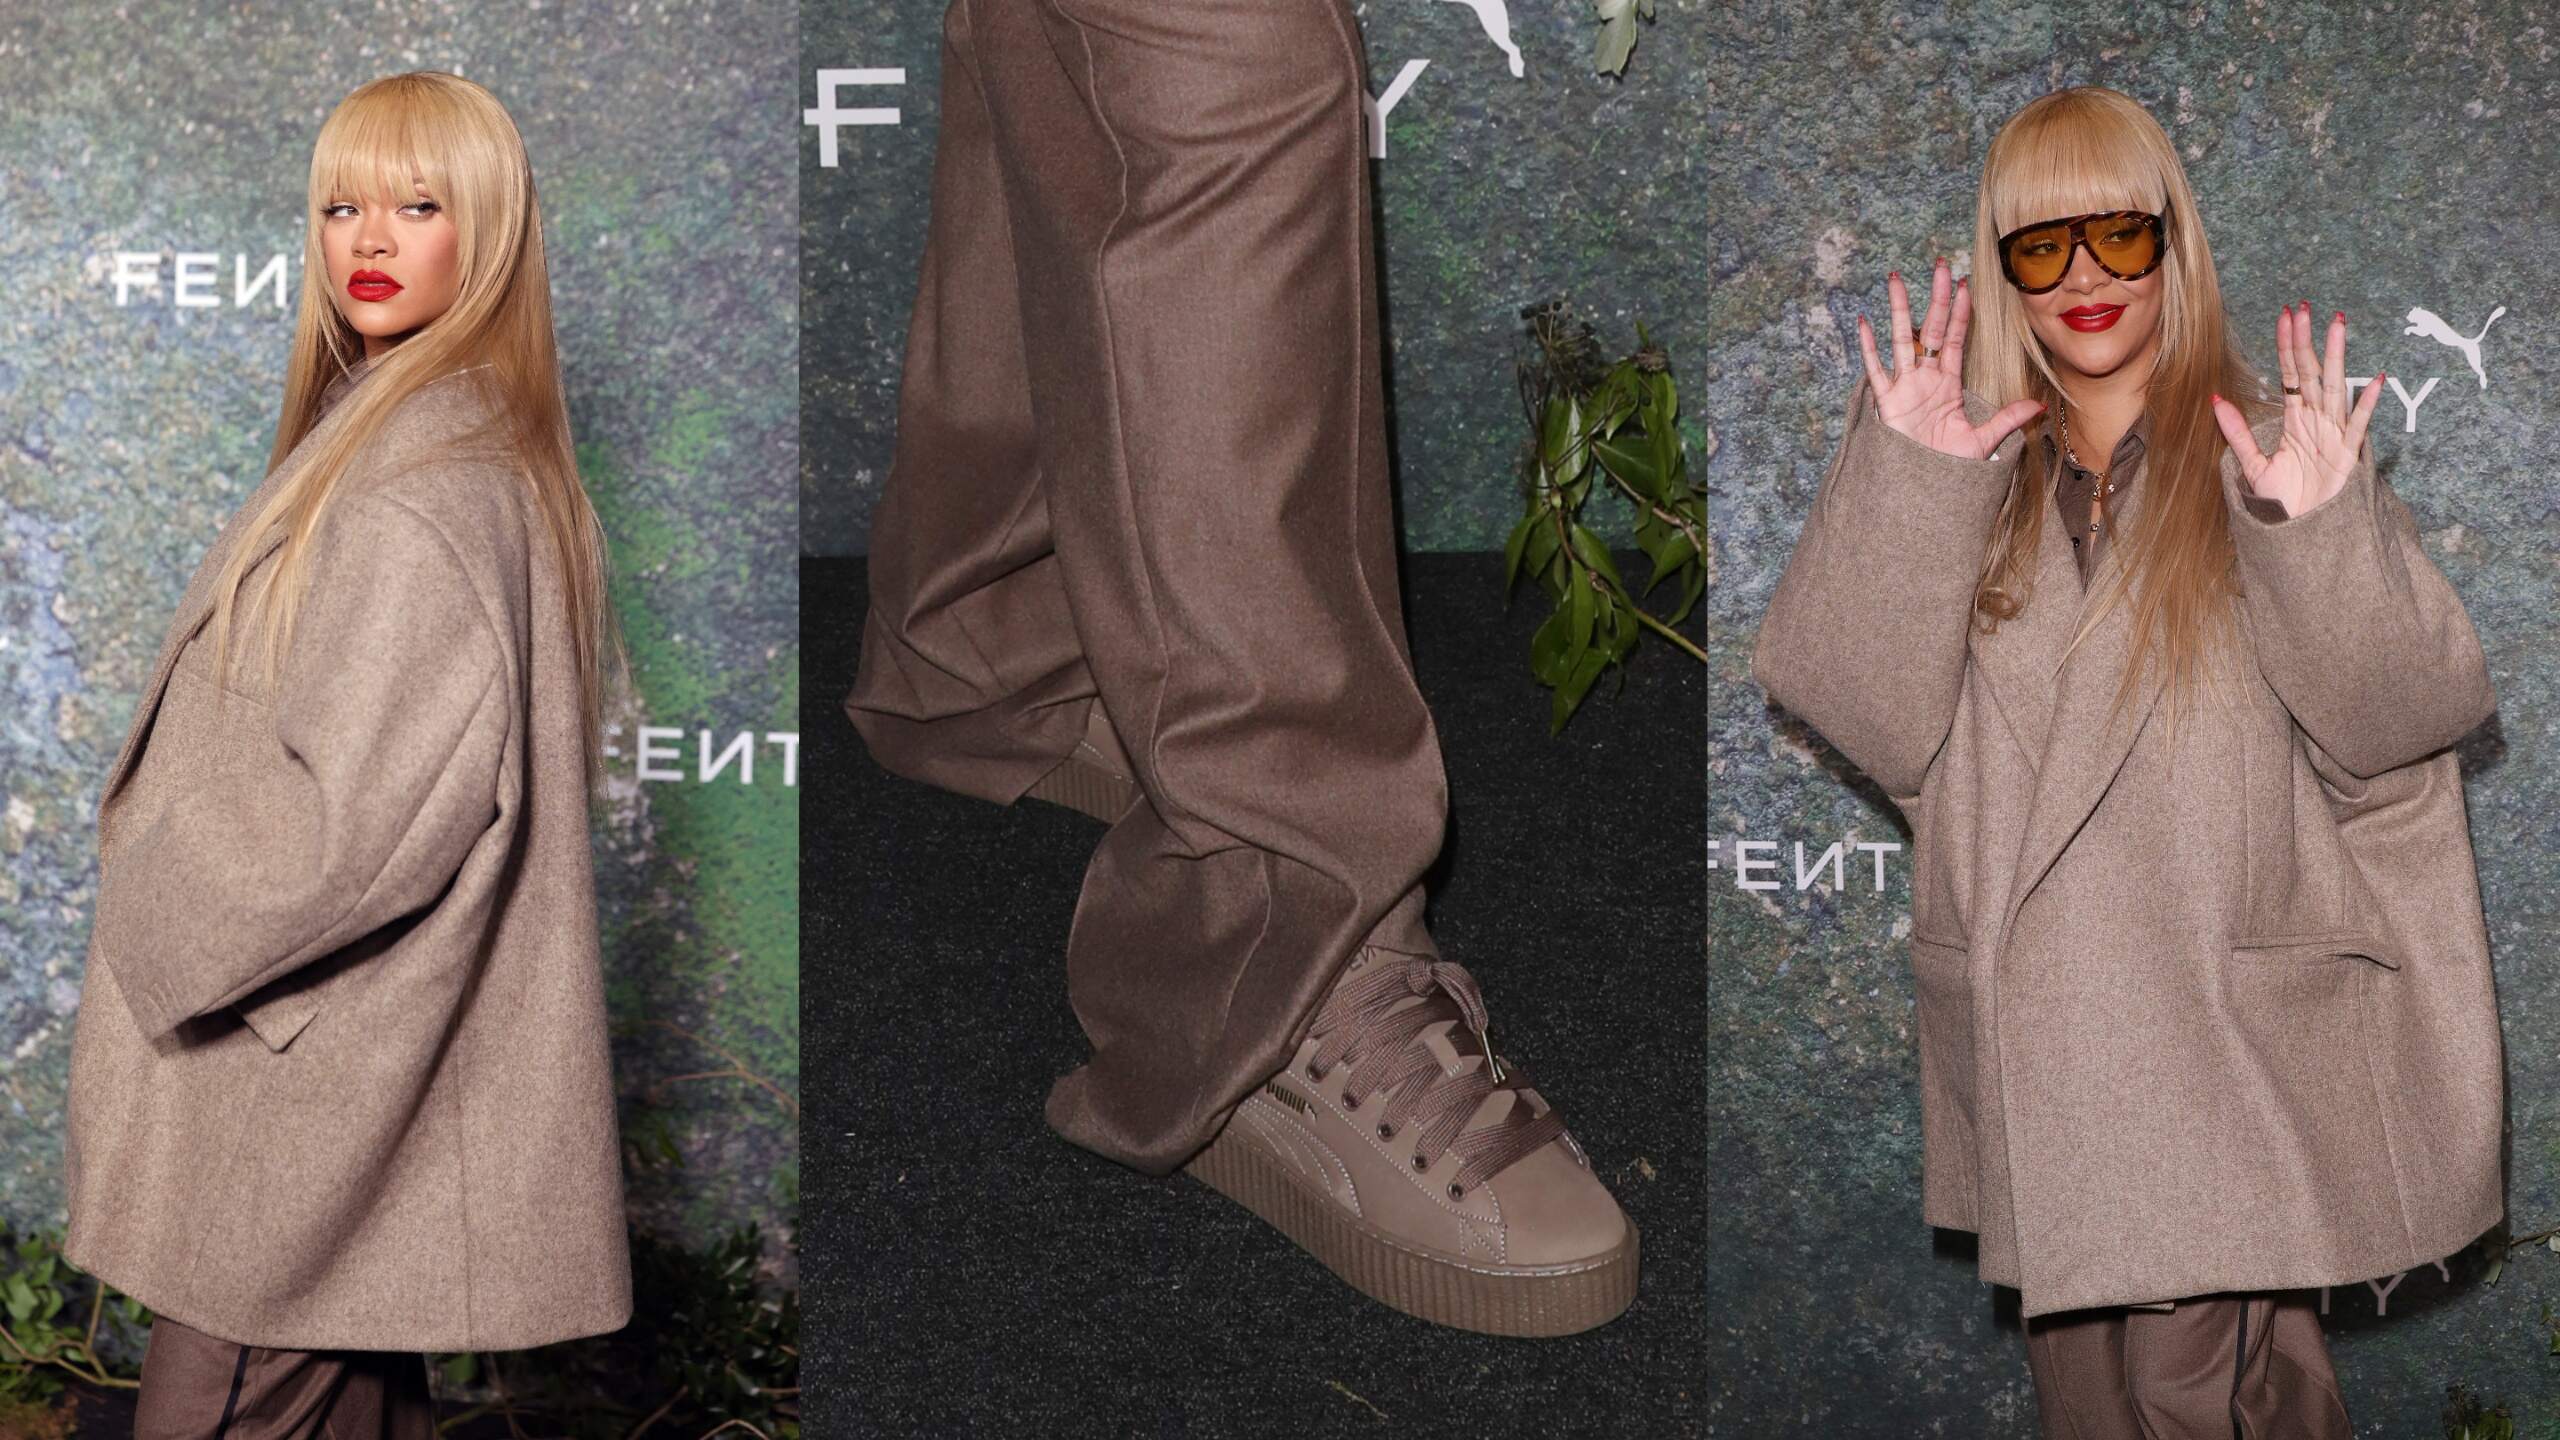 Singer Rihanna poses and waves on the red carpet at the FENTY x PUMA Creeper Phatty Launch Party